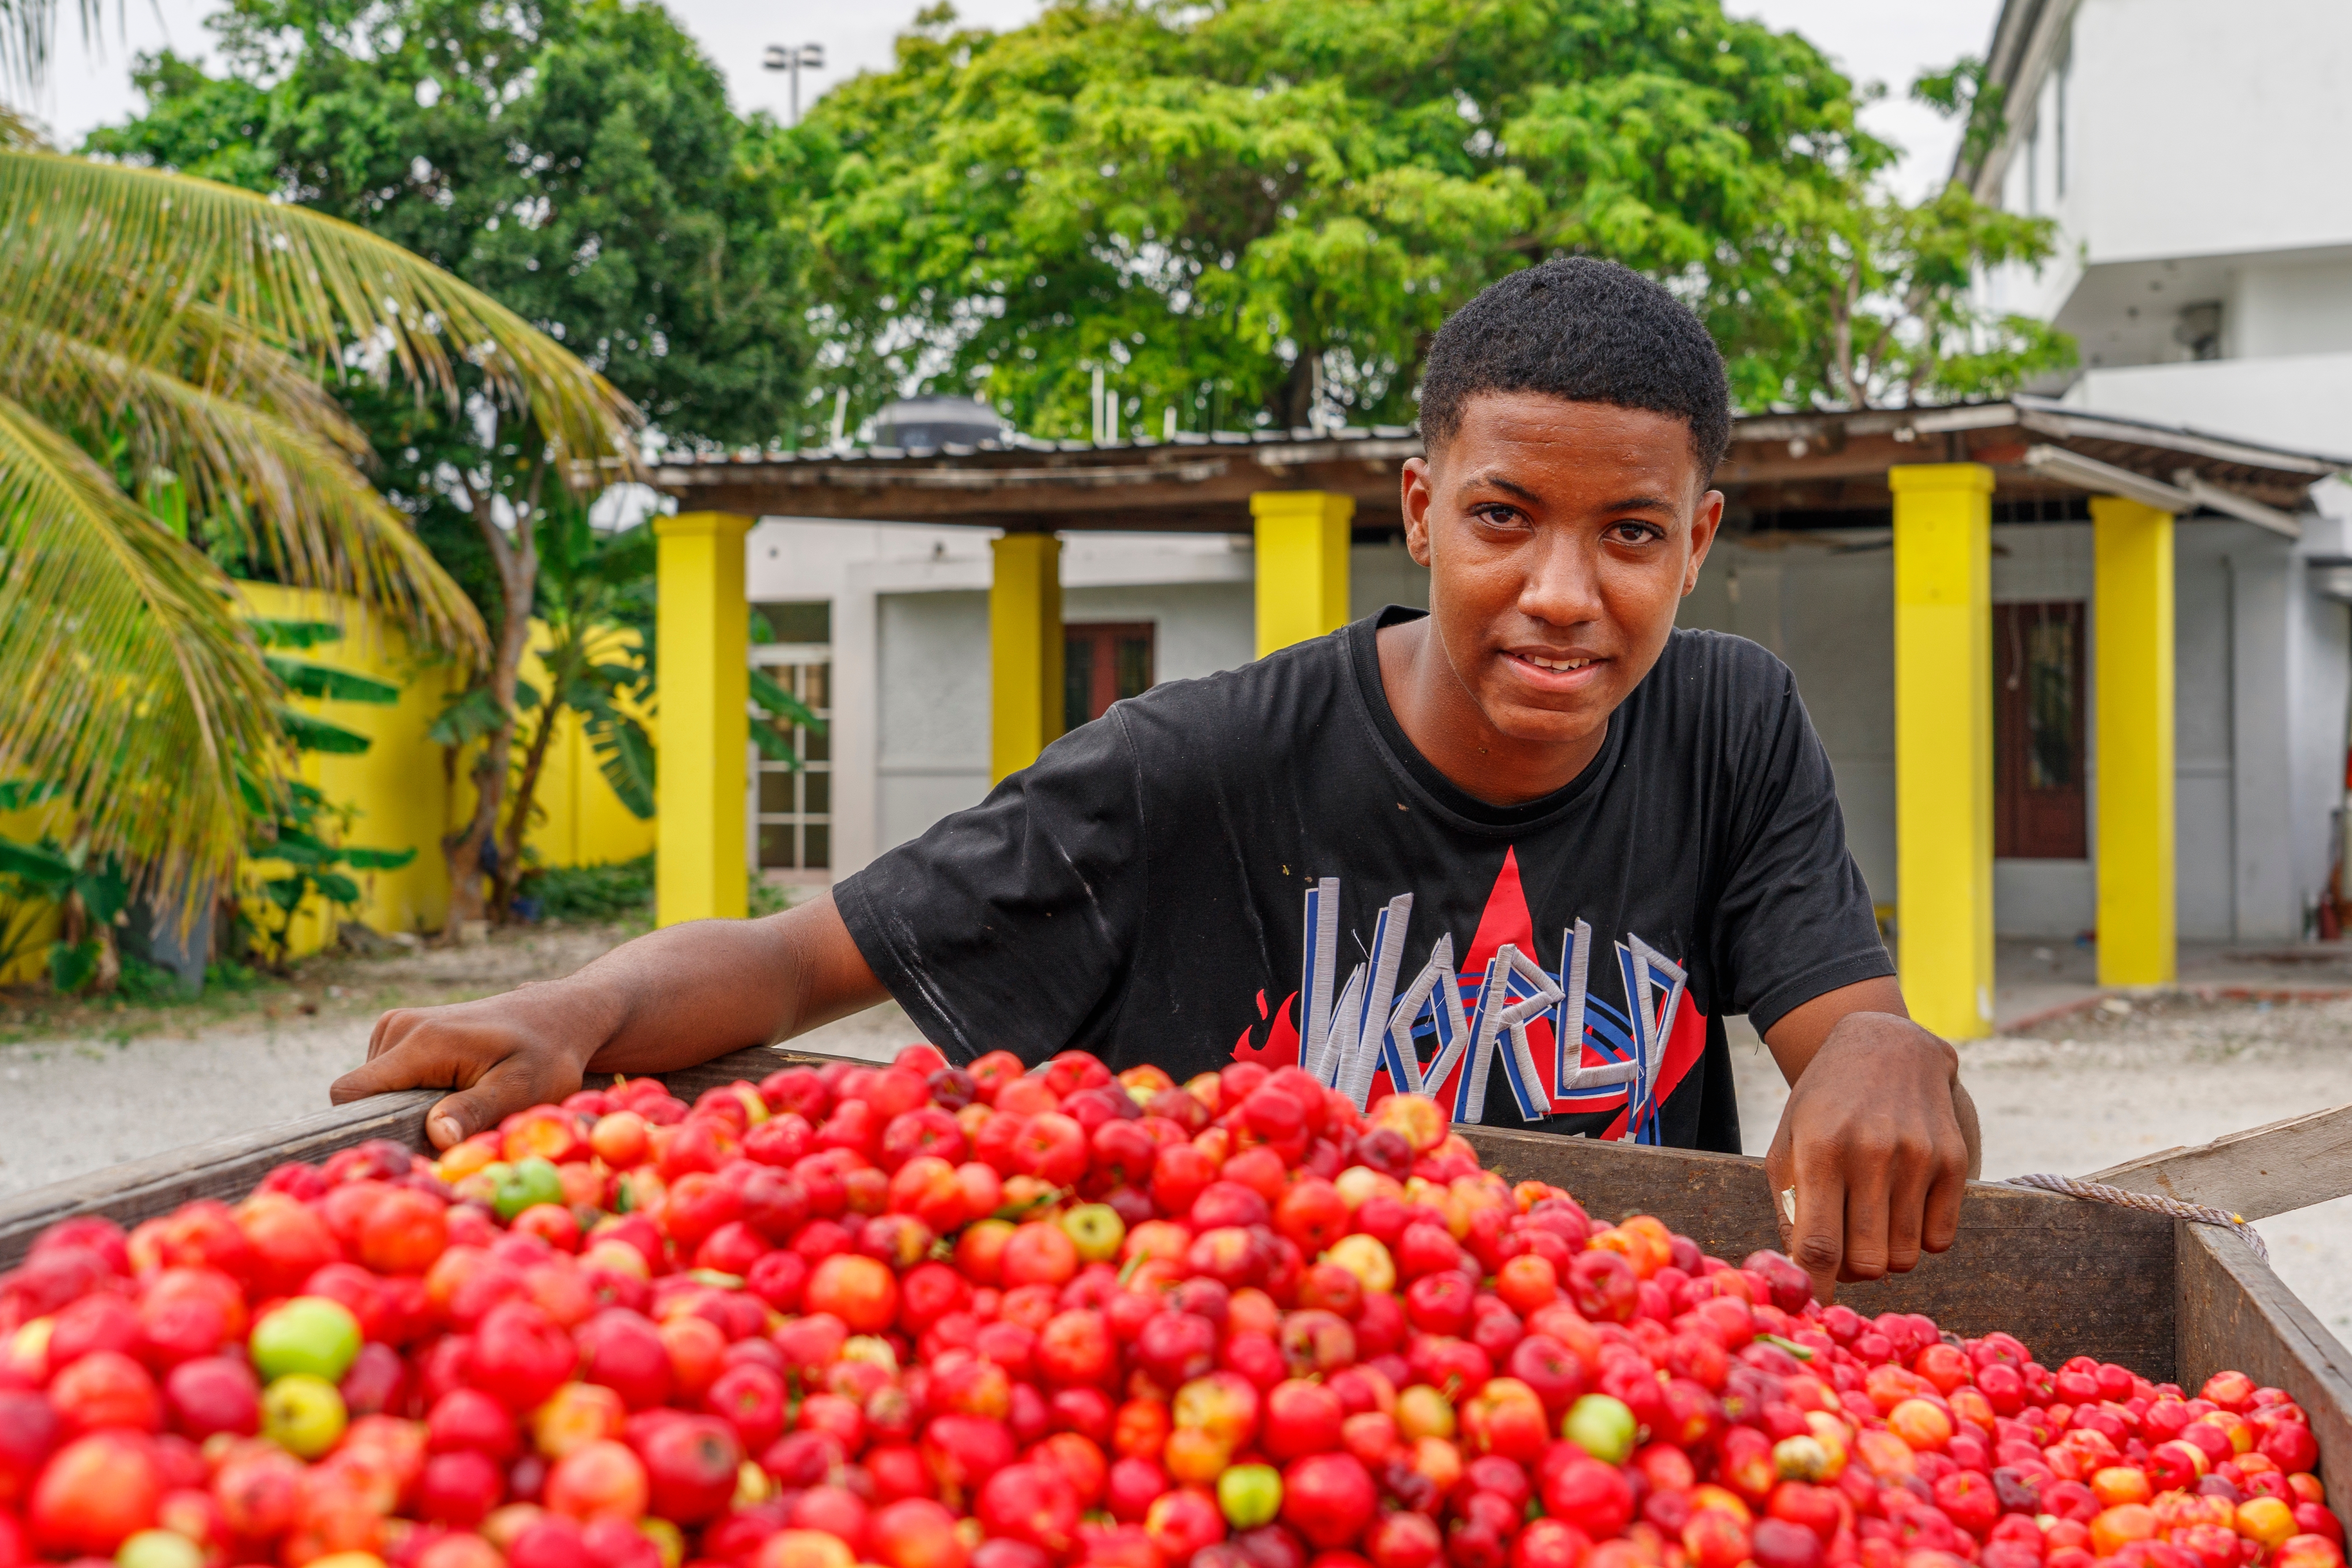 2022.08.11. Dominican Republic. Veron. A young guy sells cherries from his garden.